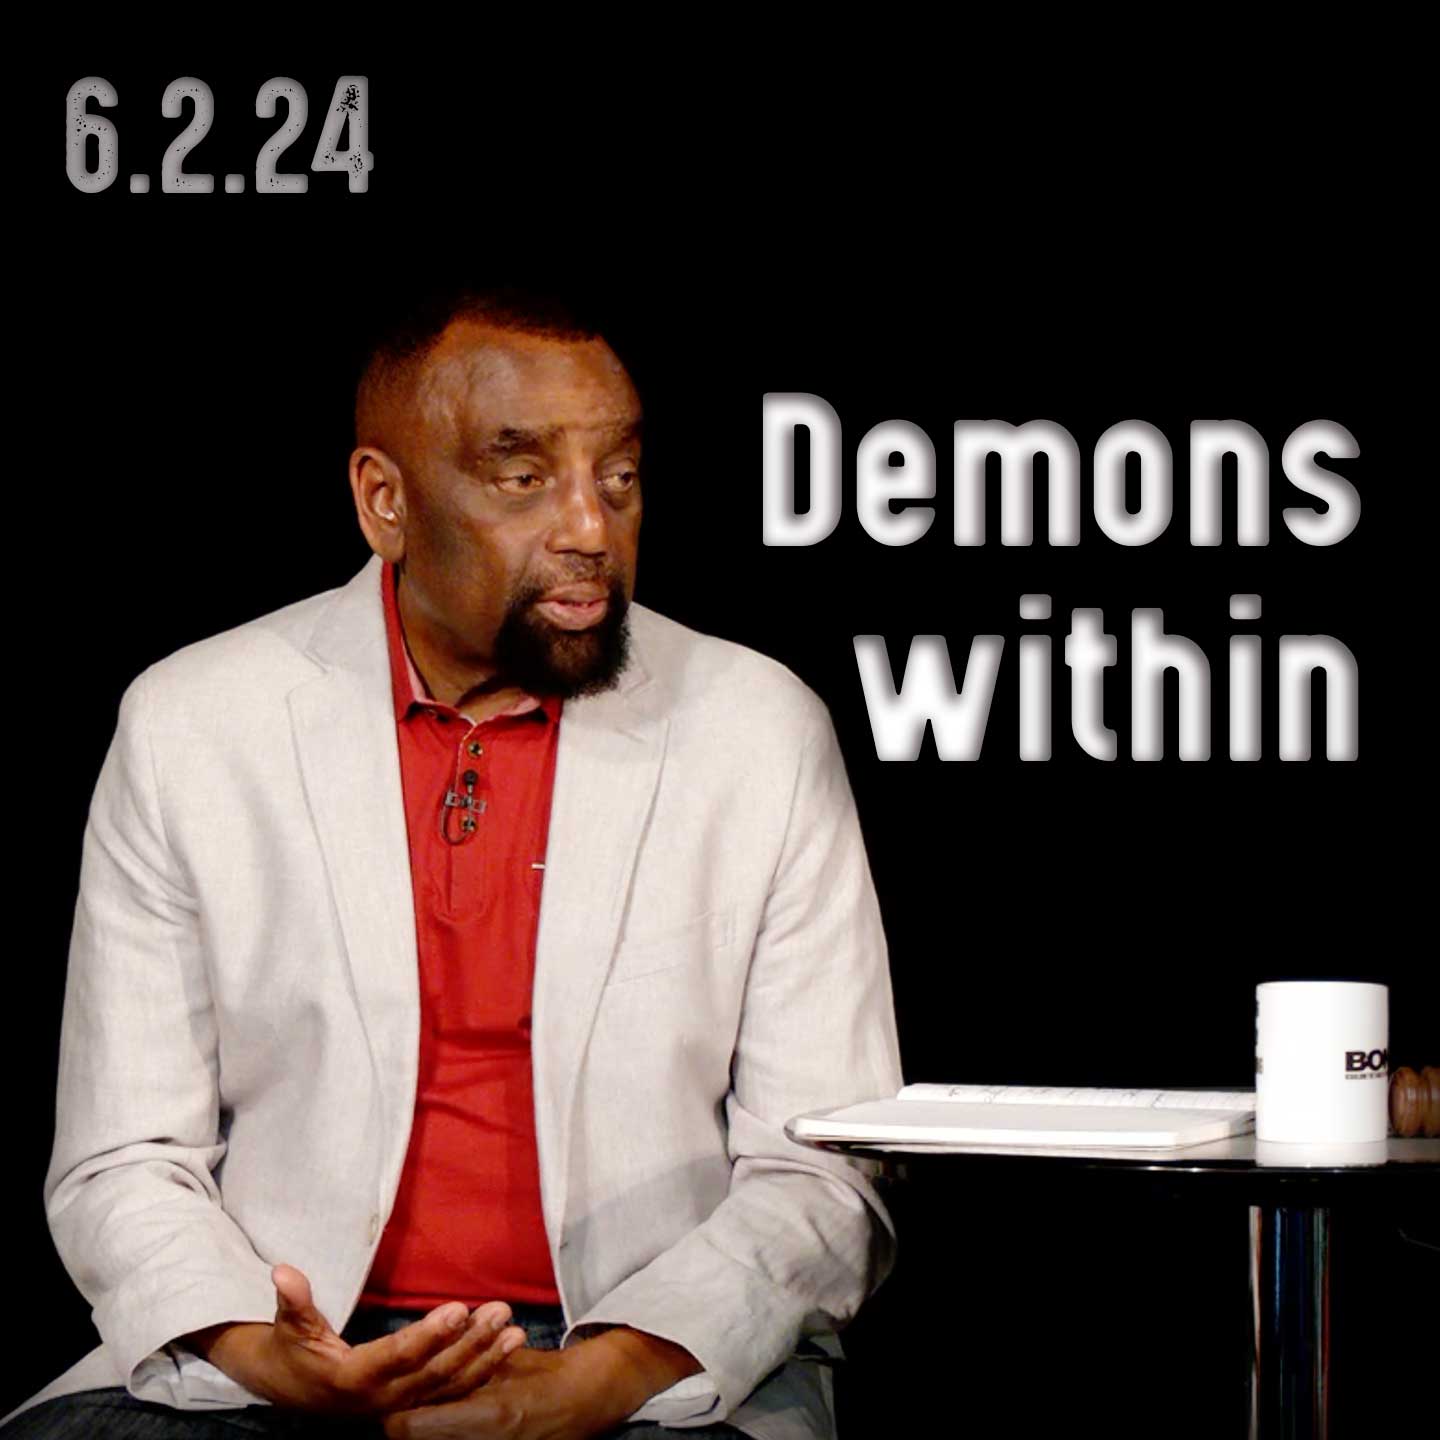 How many demons do you have inside? | Church 6/2/24